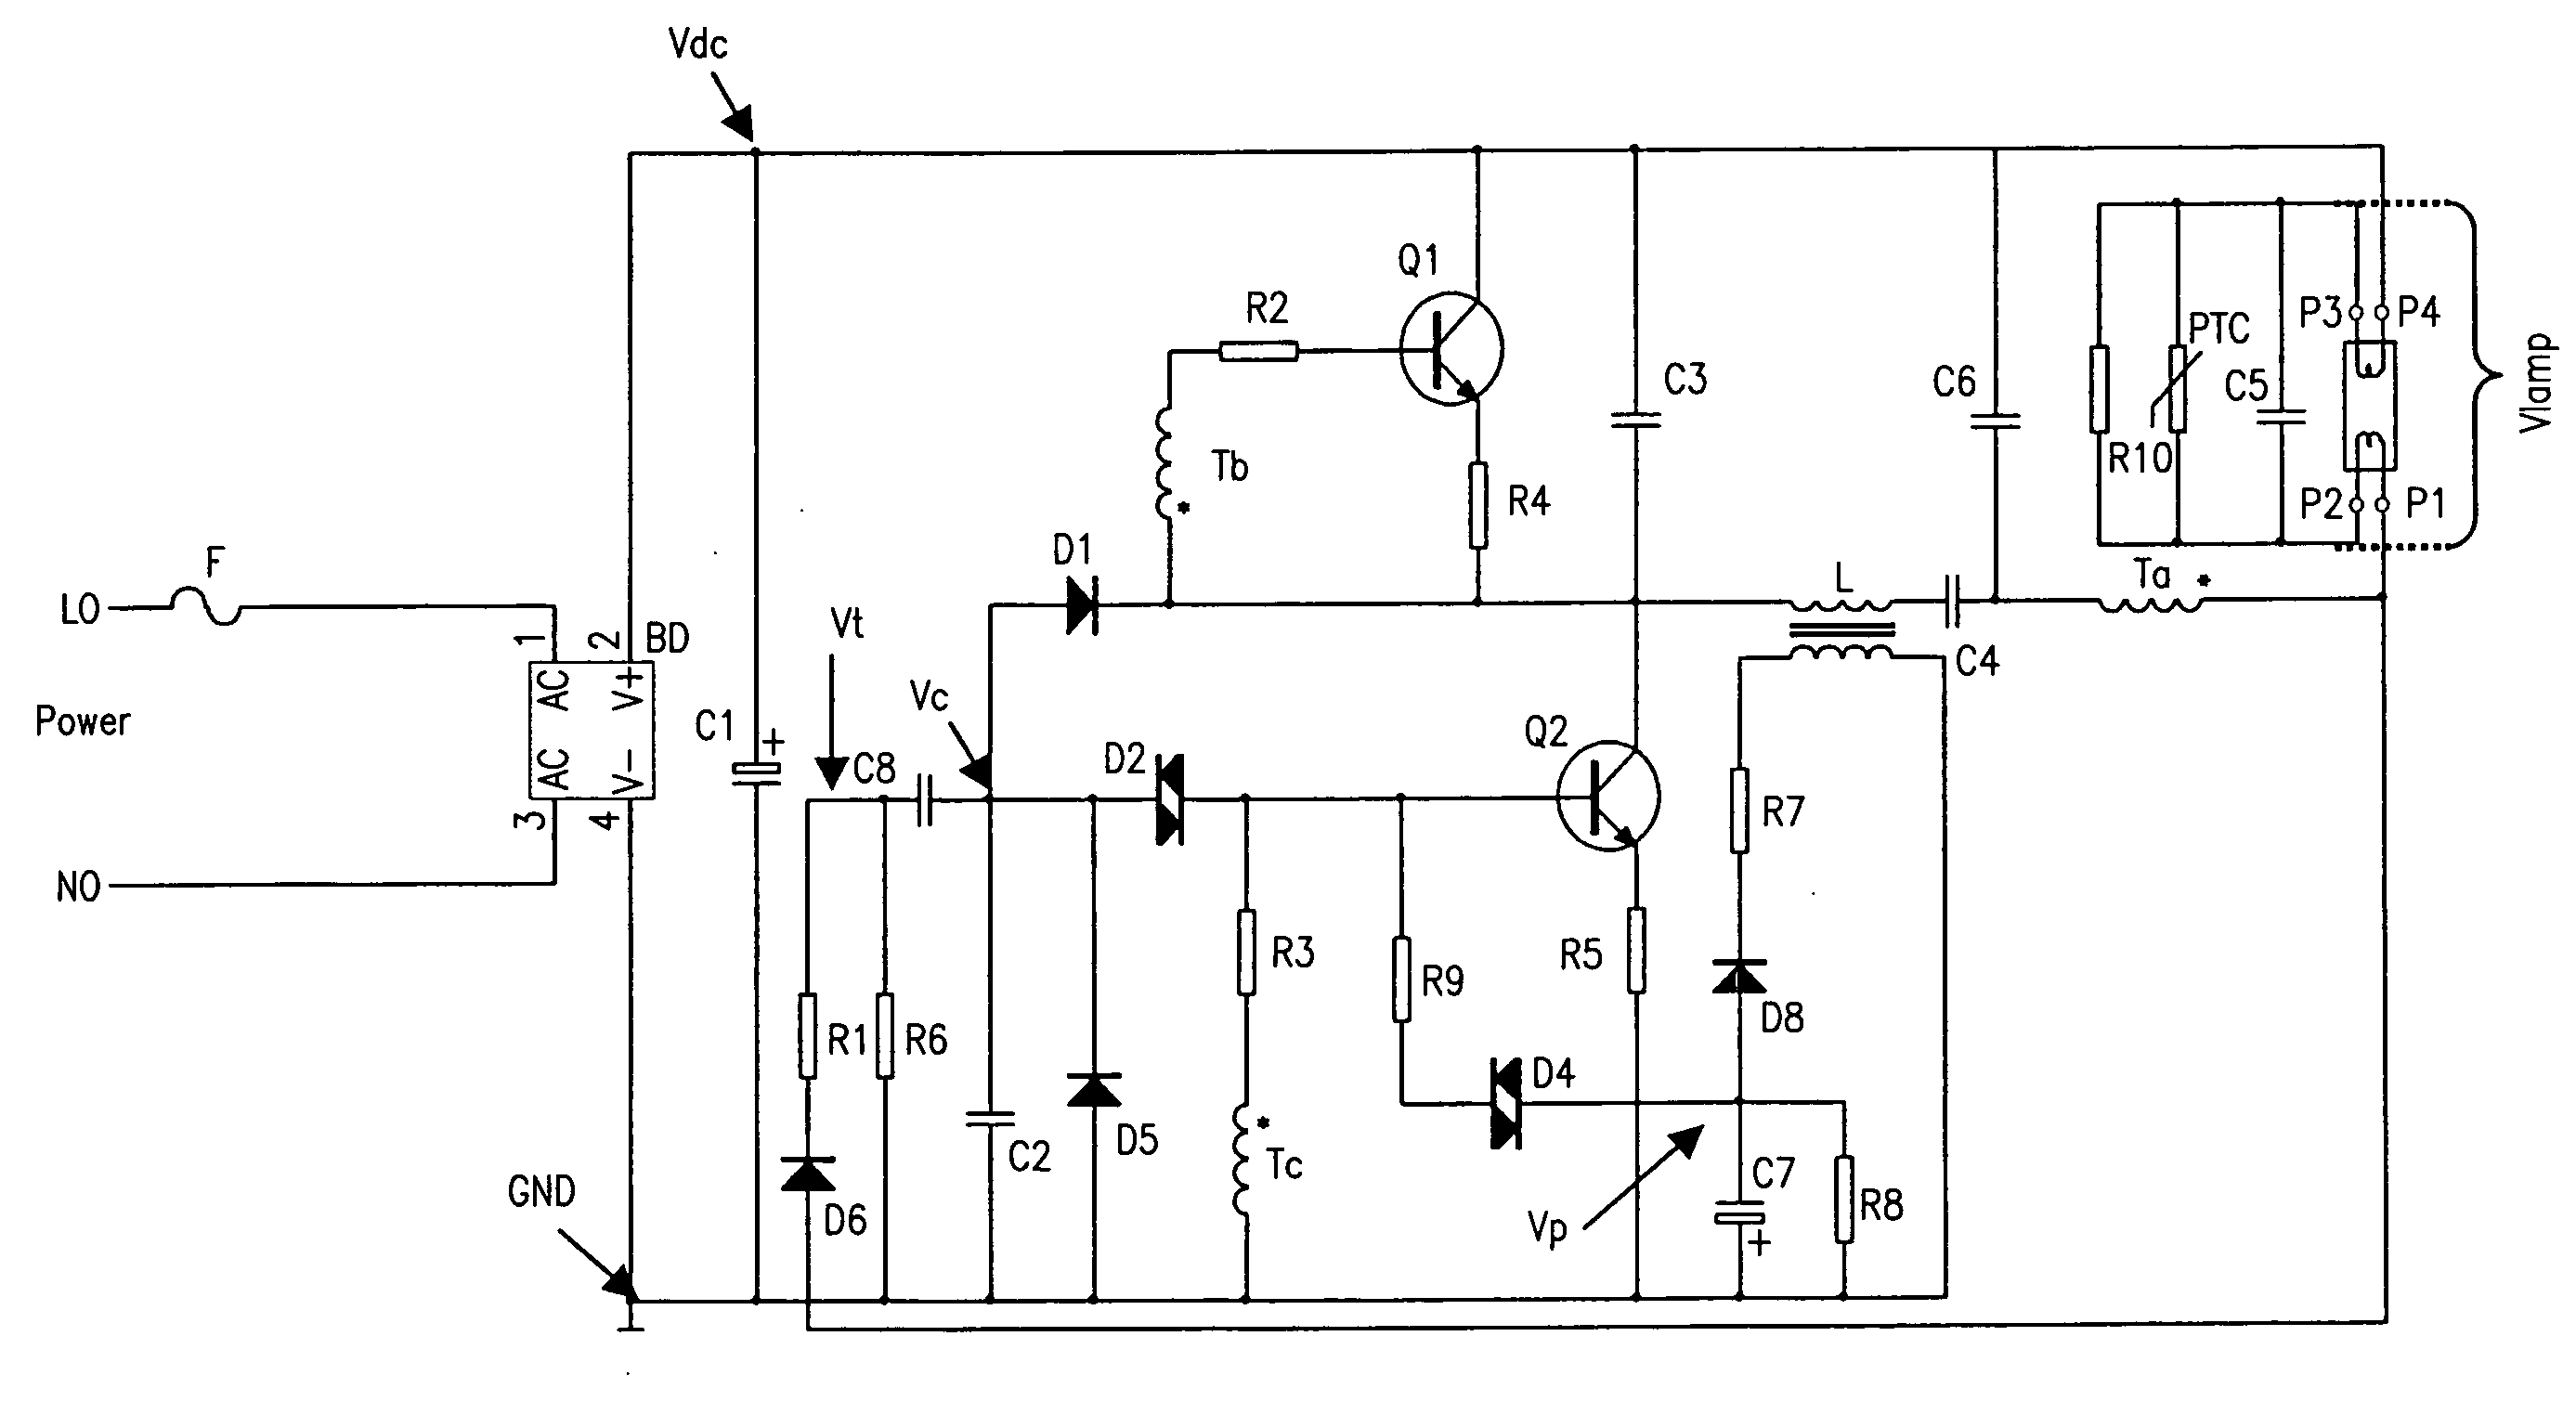 Circuit of the electronic ballast with the capability of automatic restart